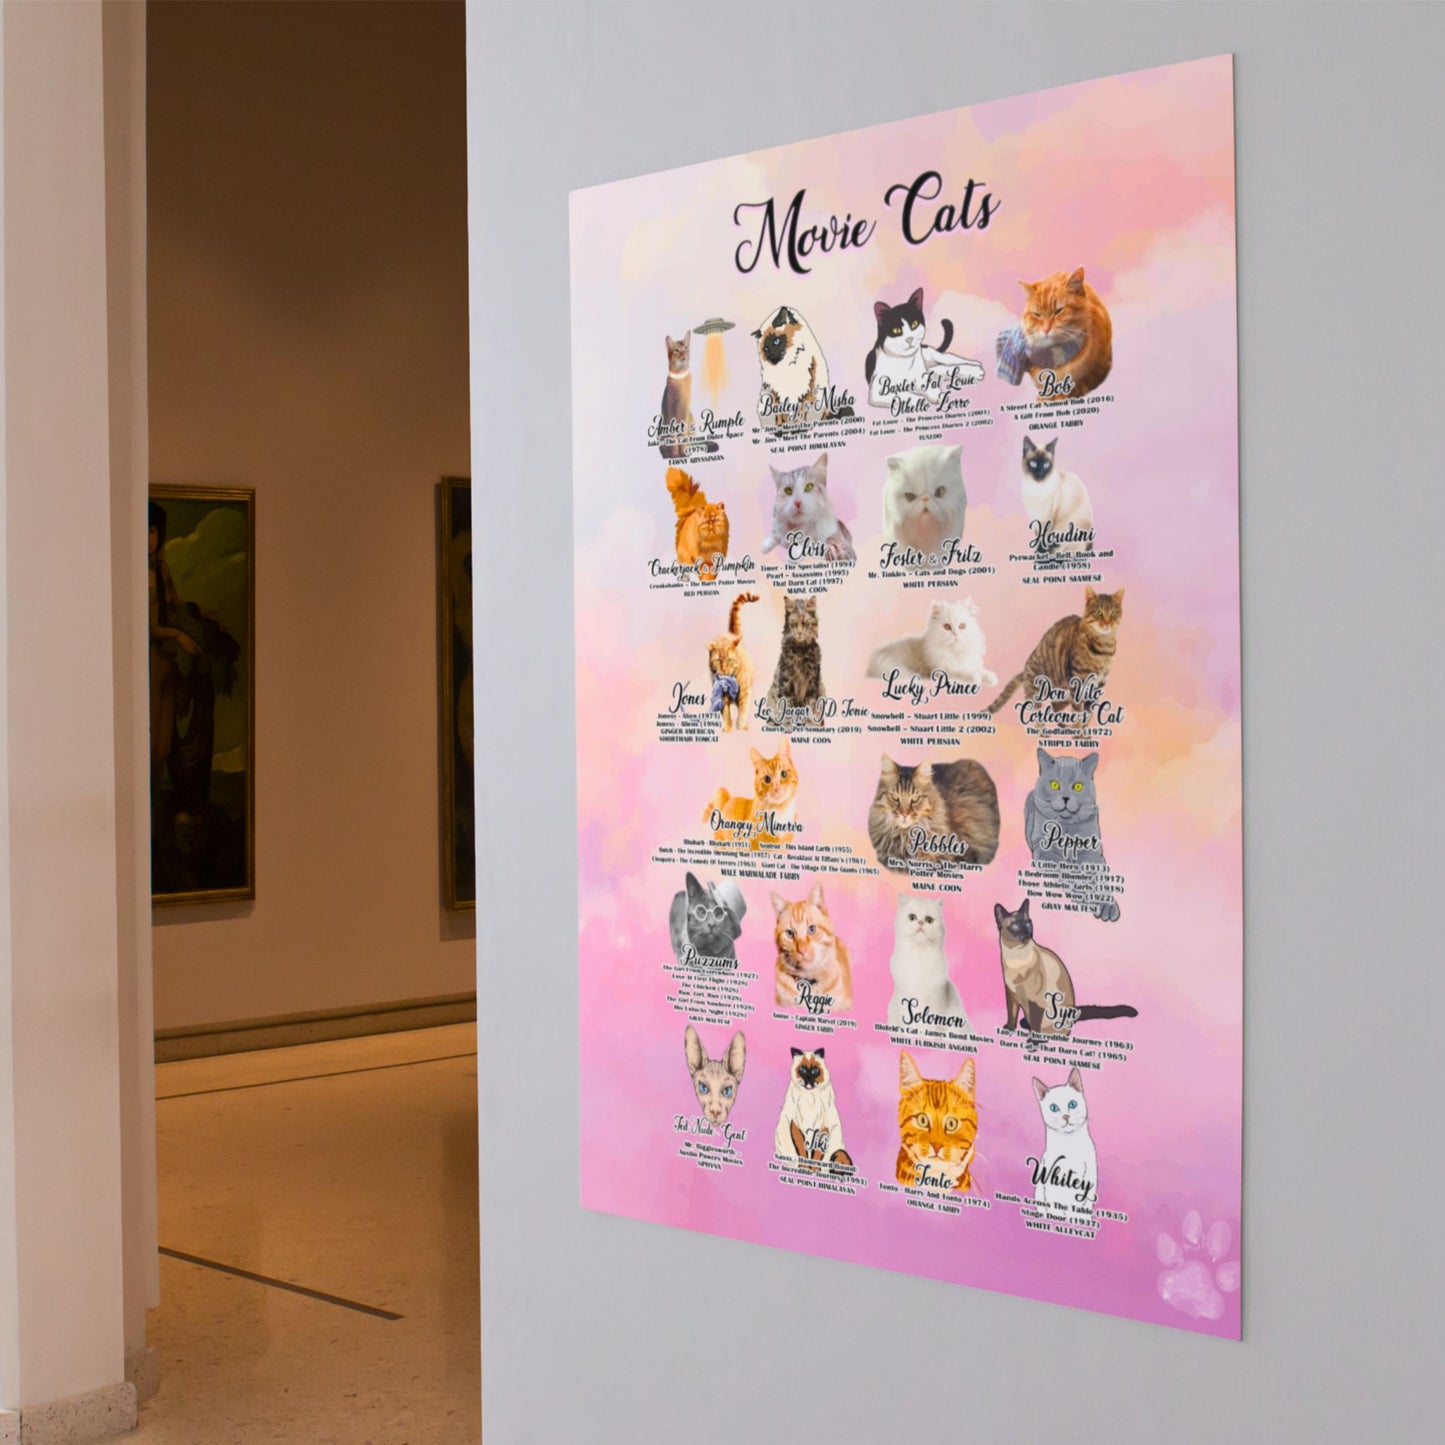 Movie Cats Poster